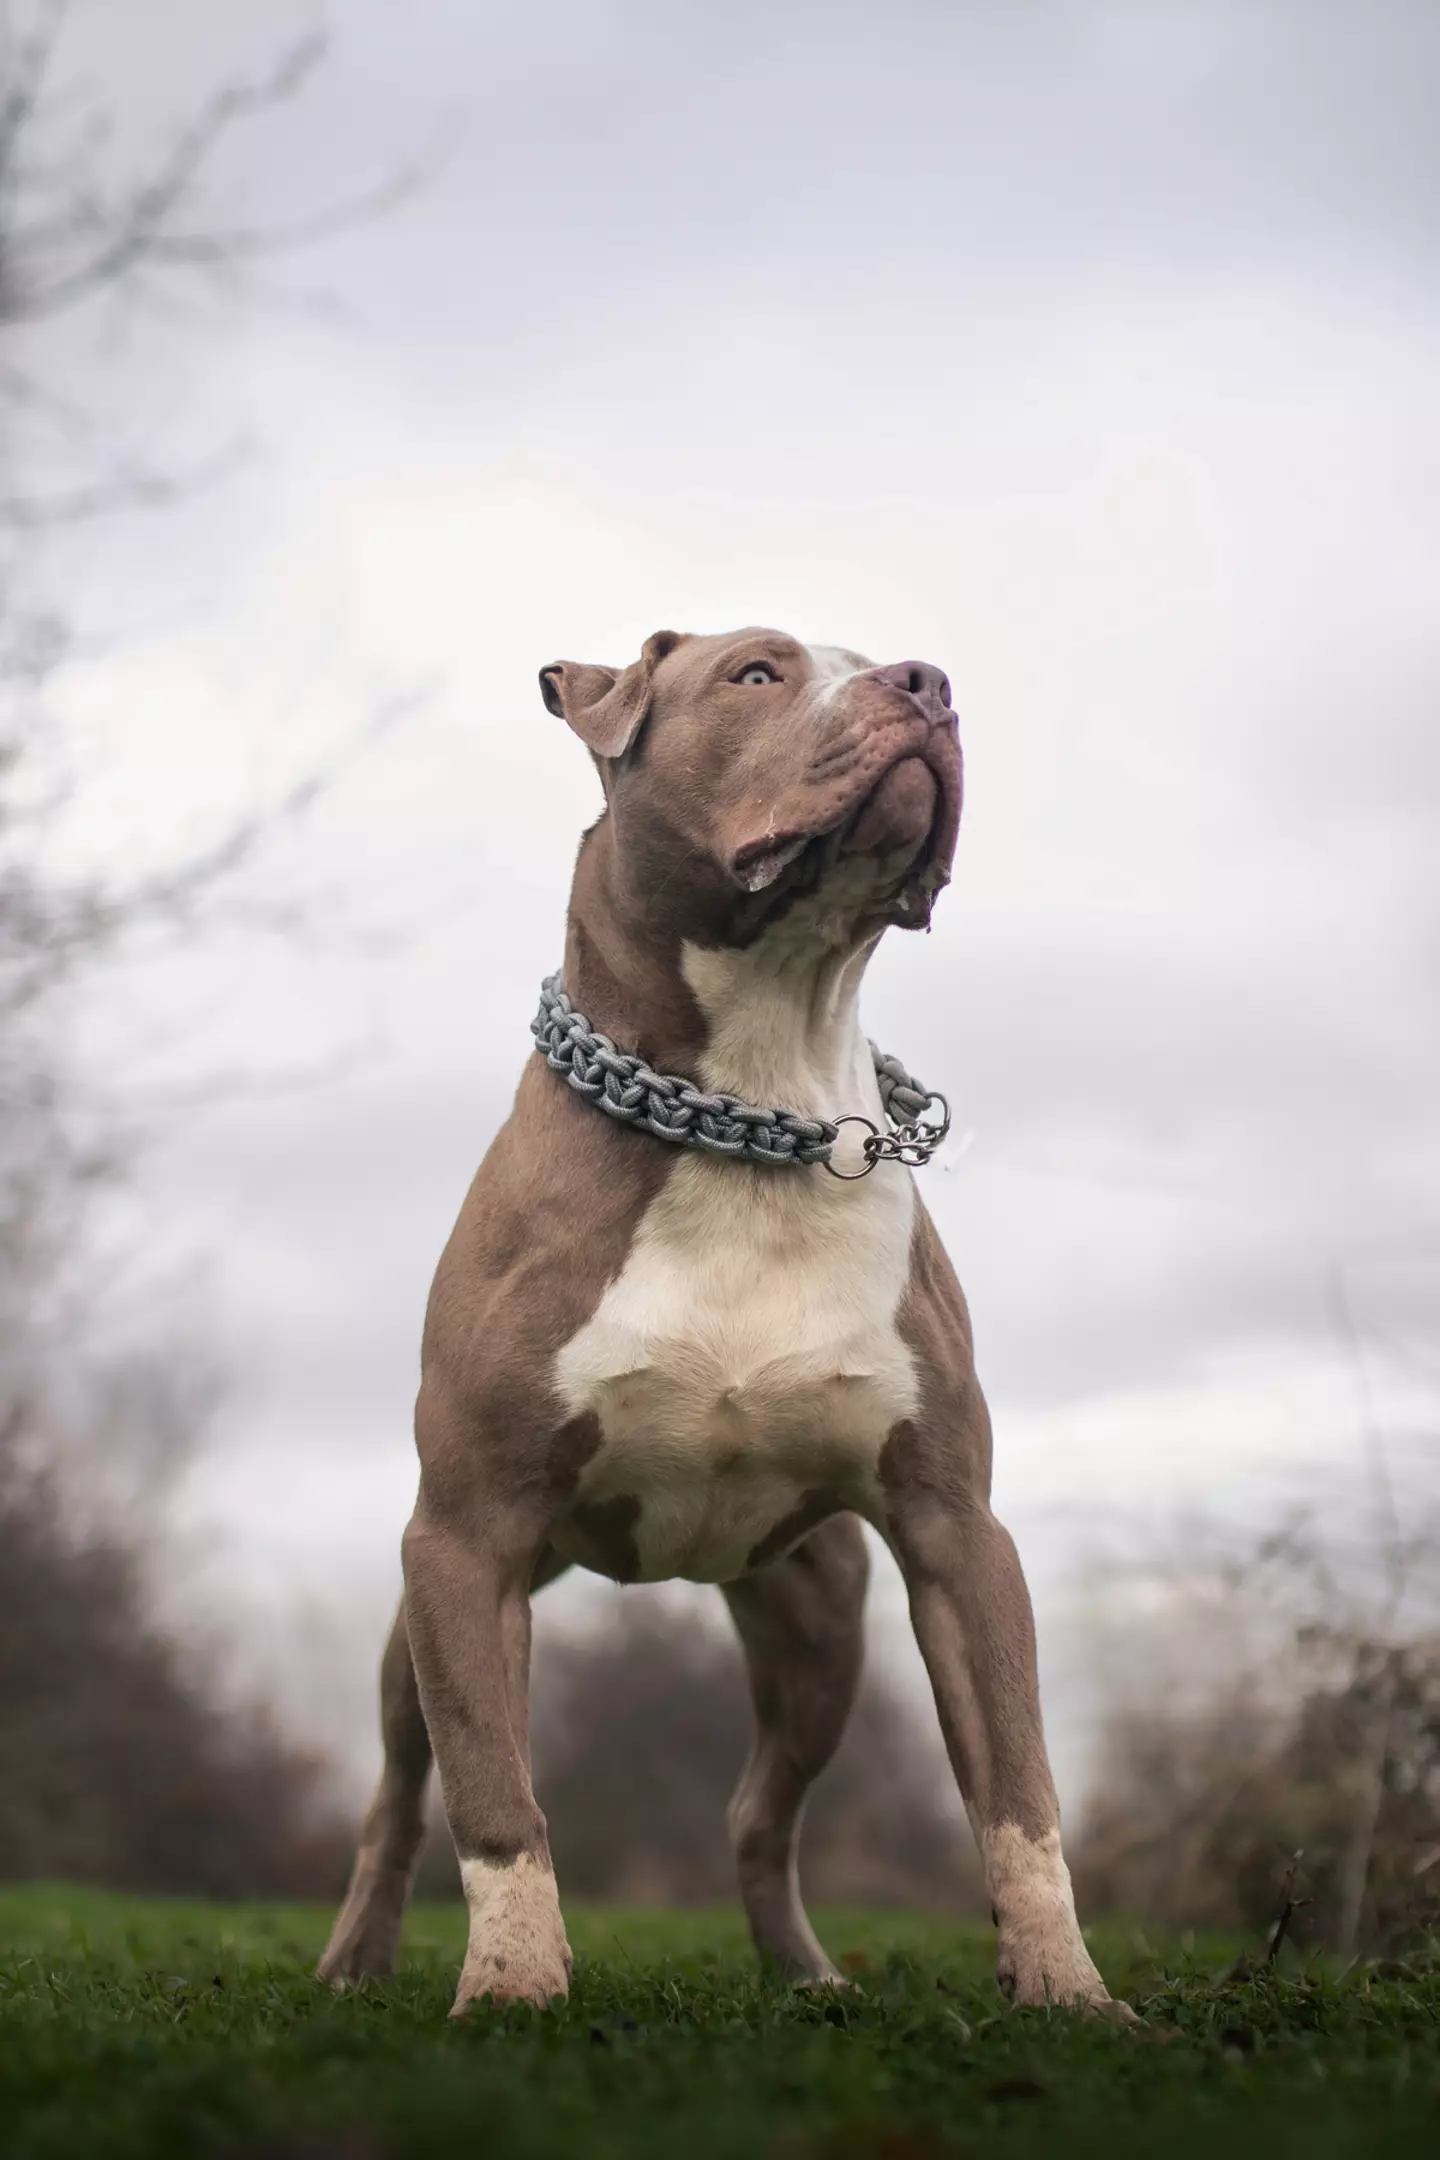 The XL Bully is now an officially banned dog breed.